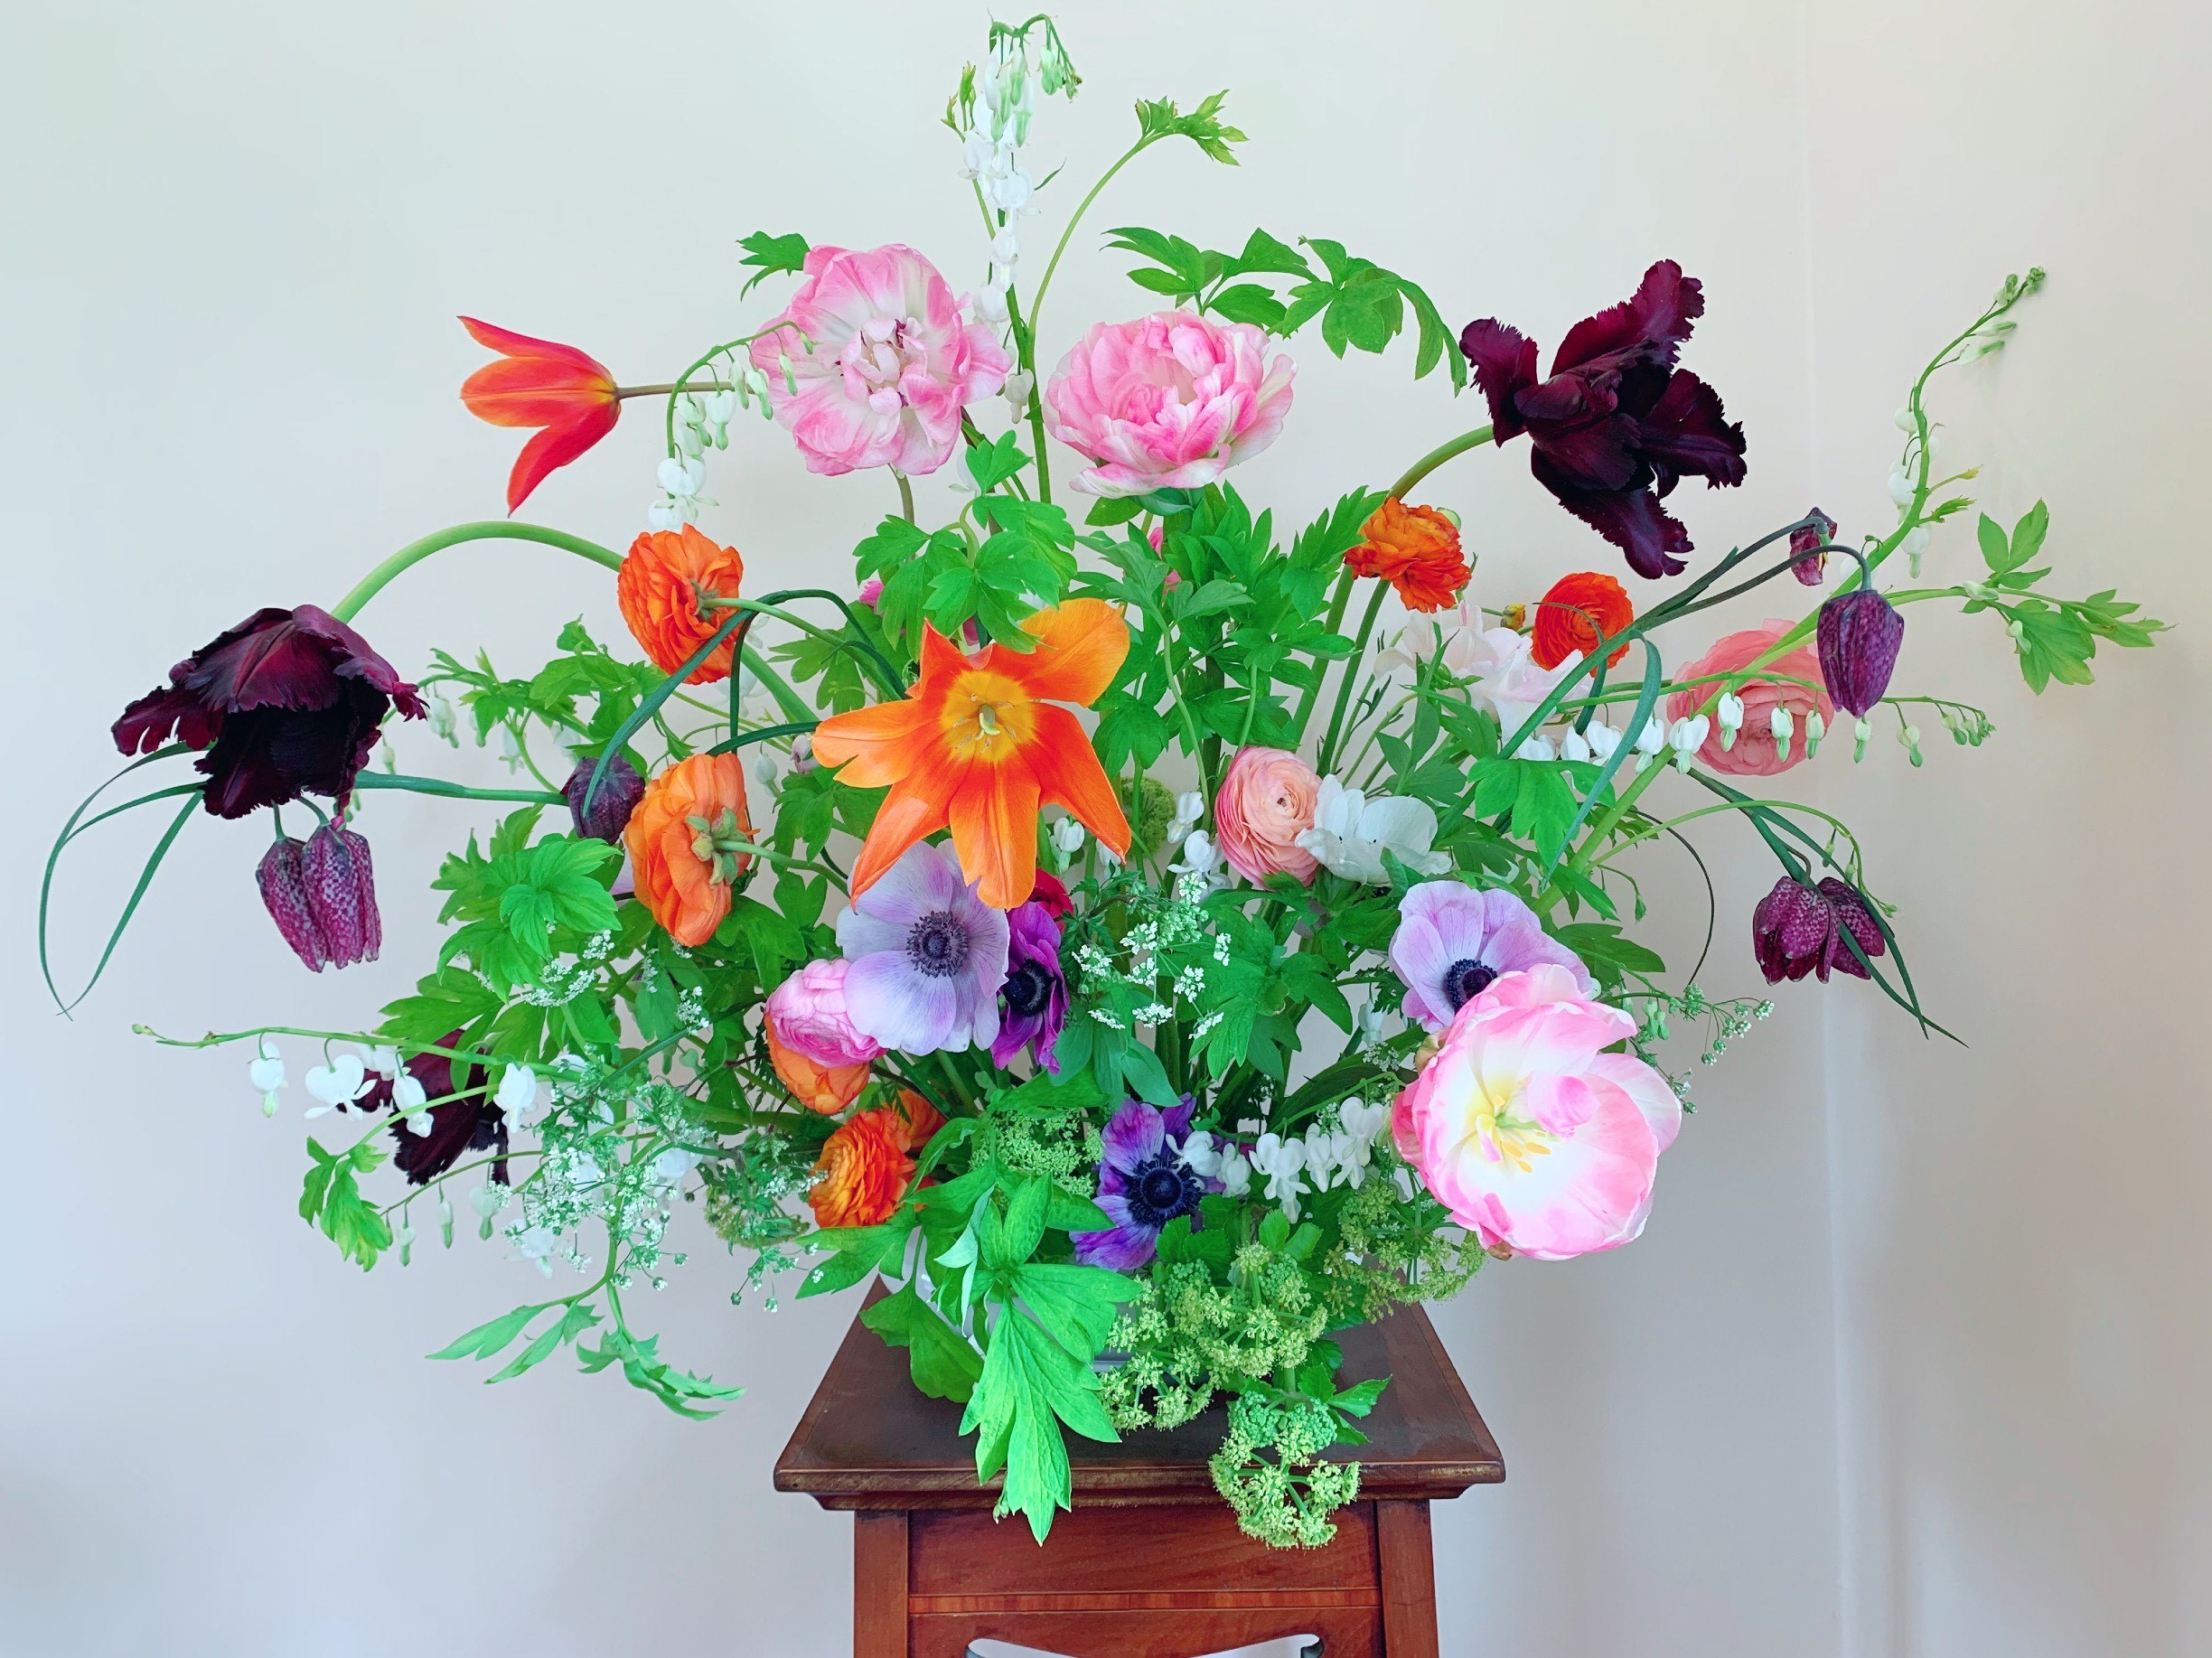 Bouquet of flowers, orange lilac, pink and red with vibrant green leaves